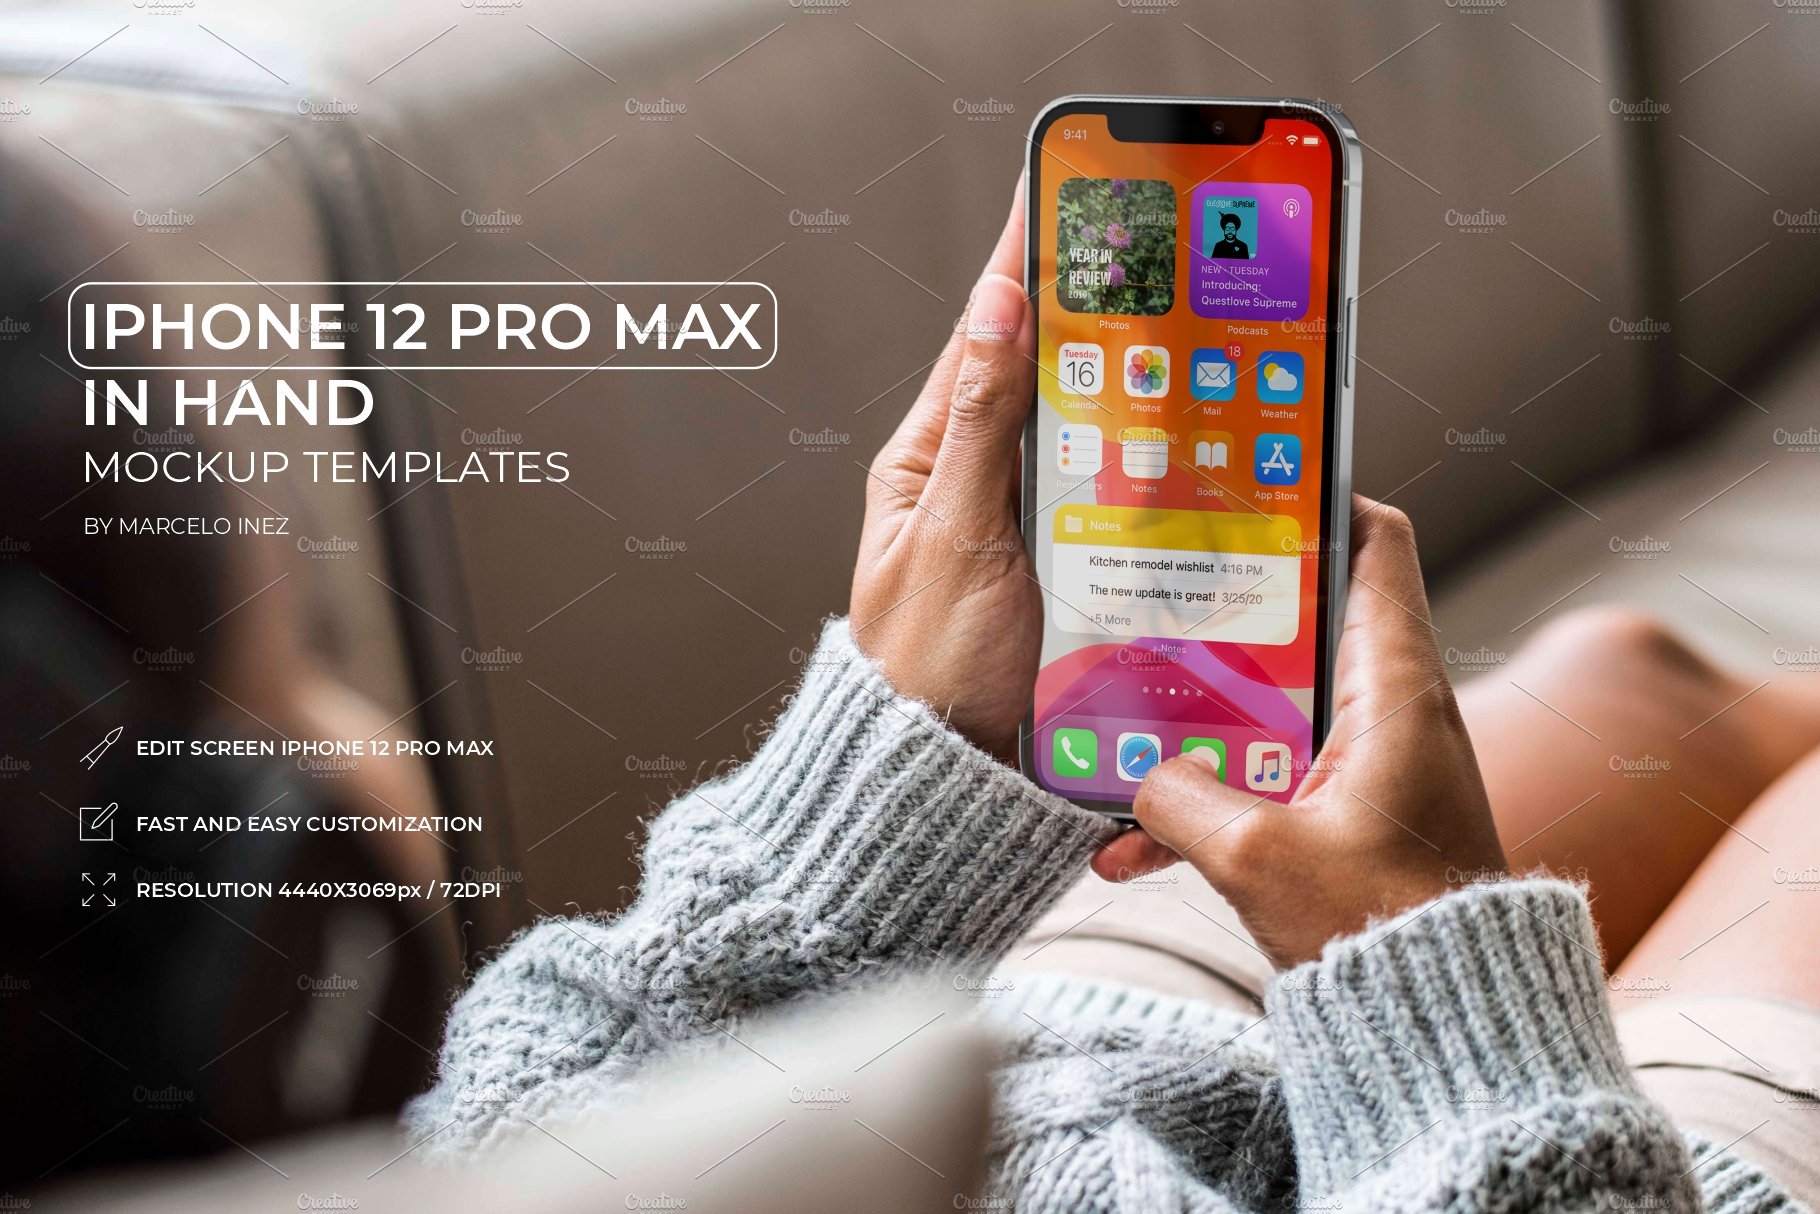 iPhone 12 Pro Max in Hand Mockup cover image.